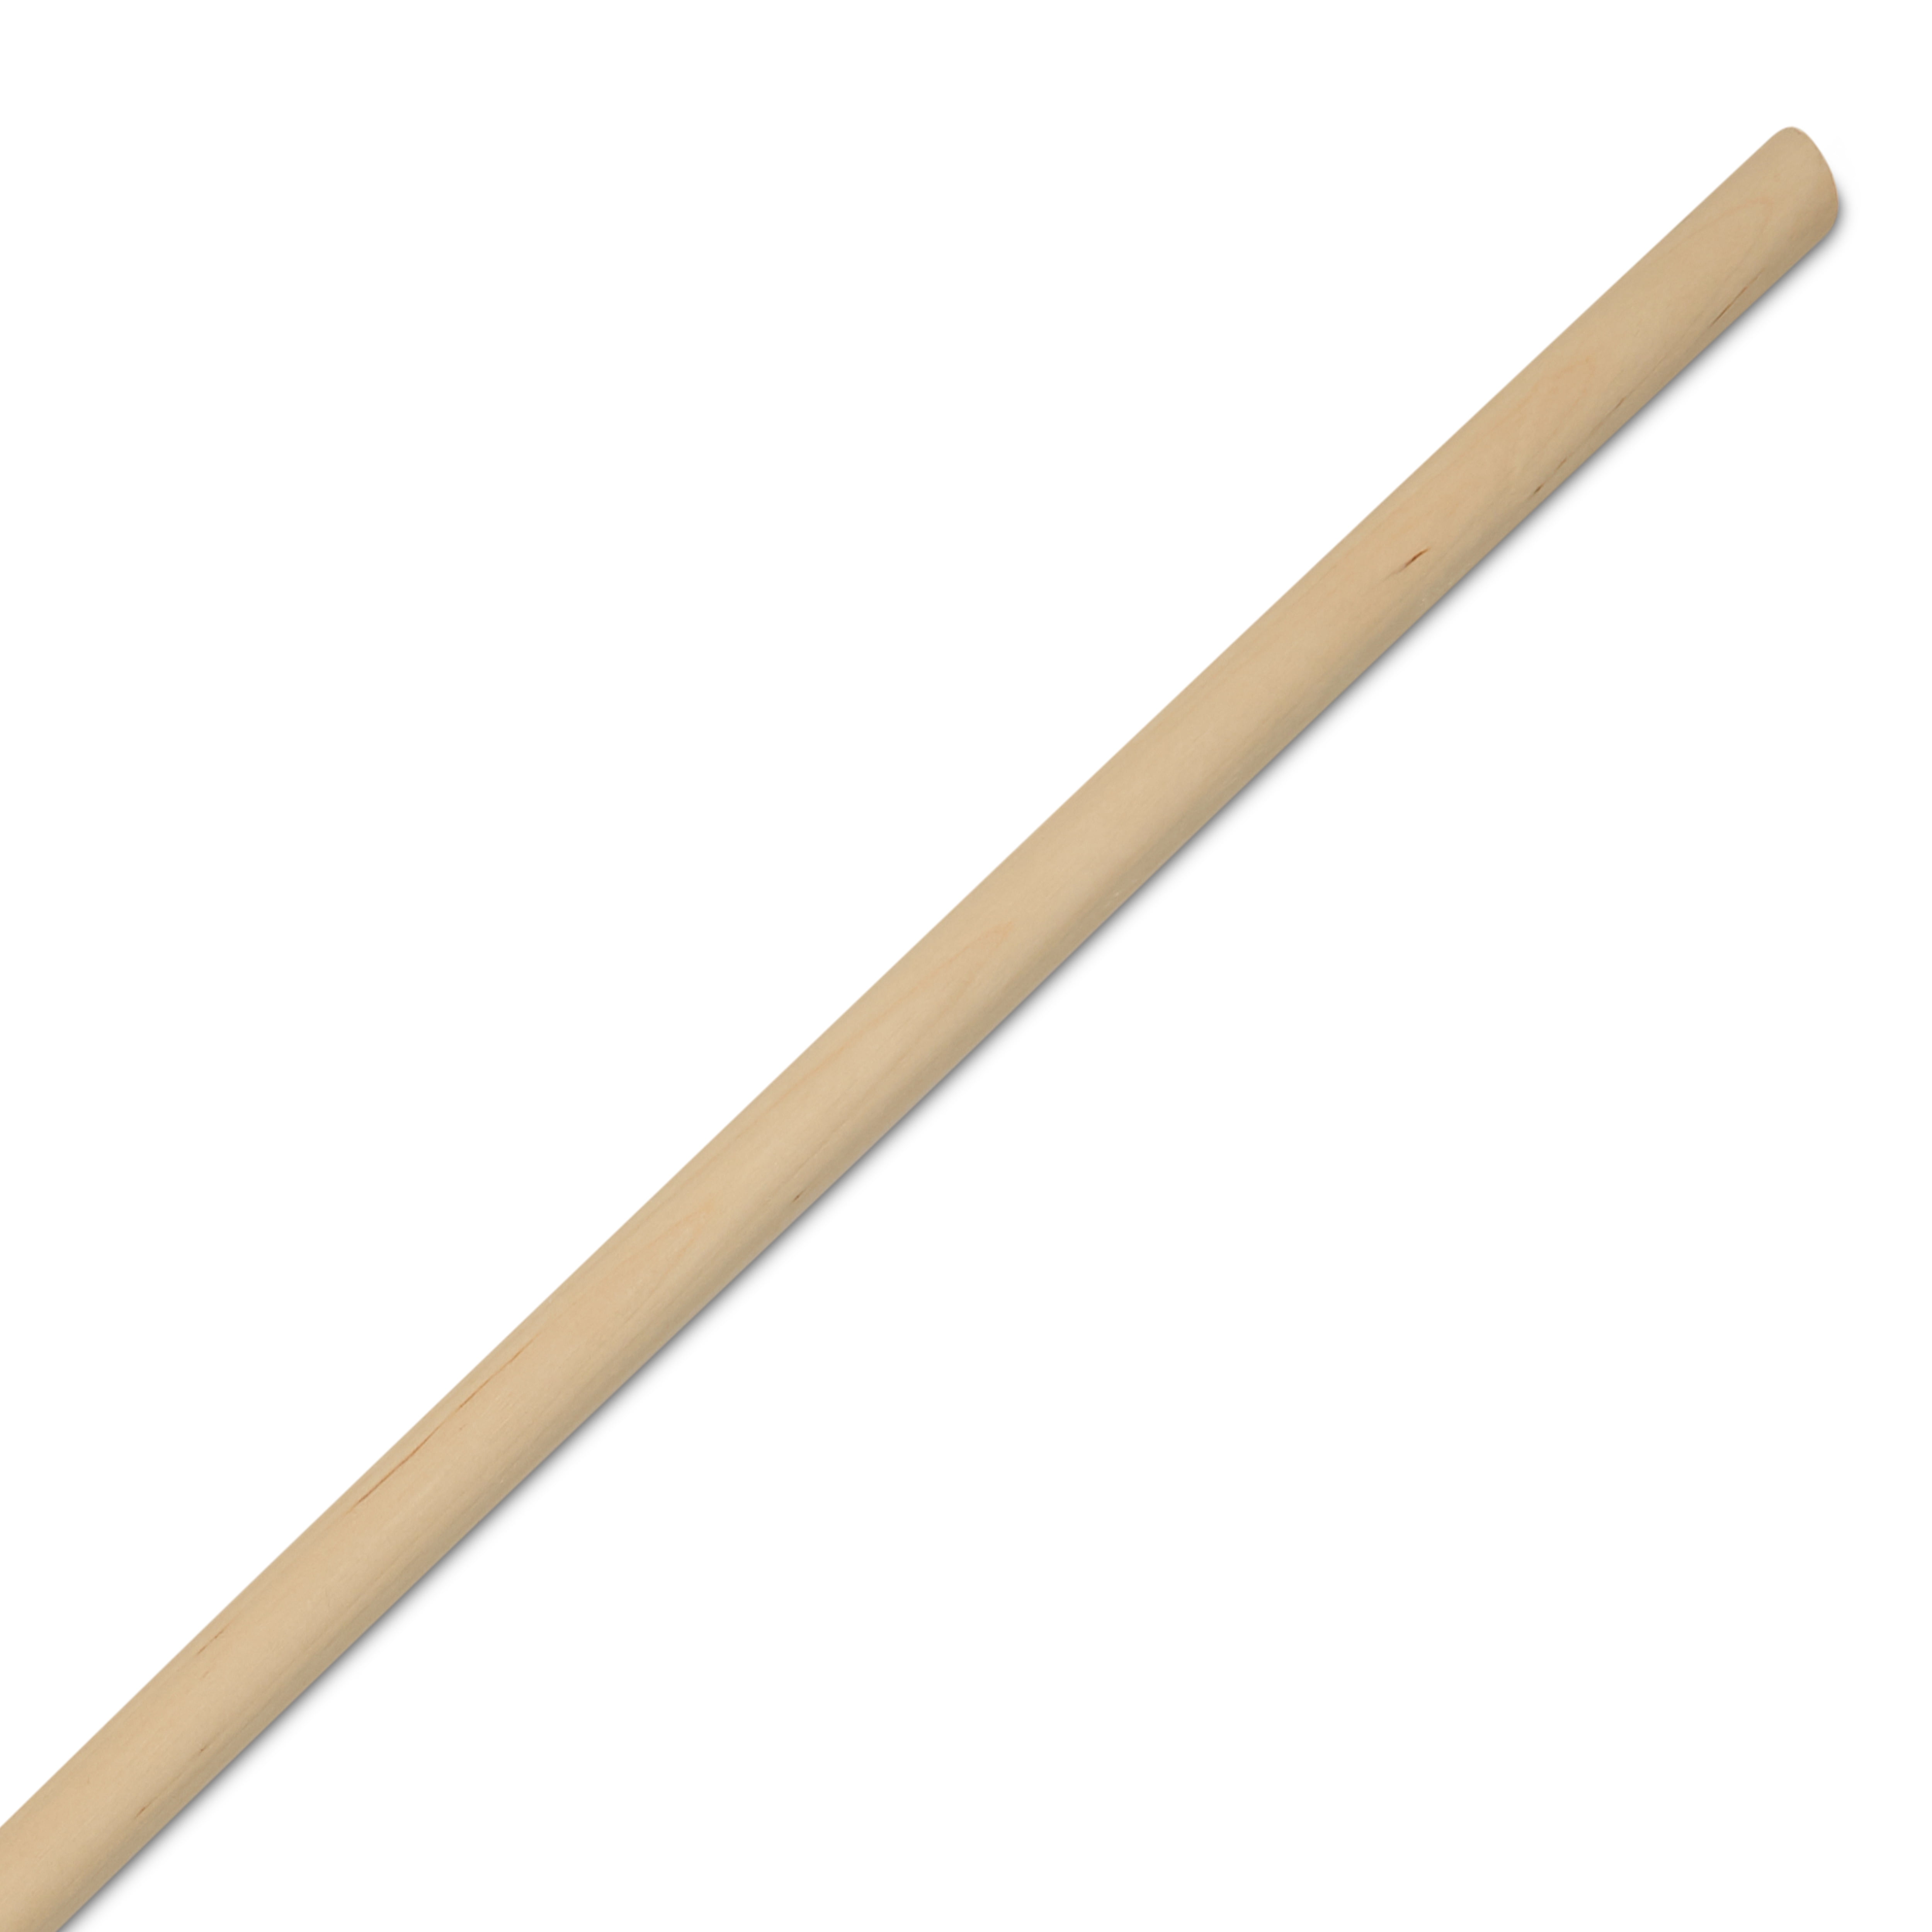 Dowel Rods Wood Sticks Wooden Dowel Rods - 1/2 x 12 Inch Unfinished  Hardwood Sticks - for Crafts and DIYers - 25 Pieces by Woodpeckers 